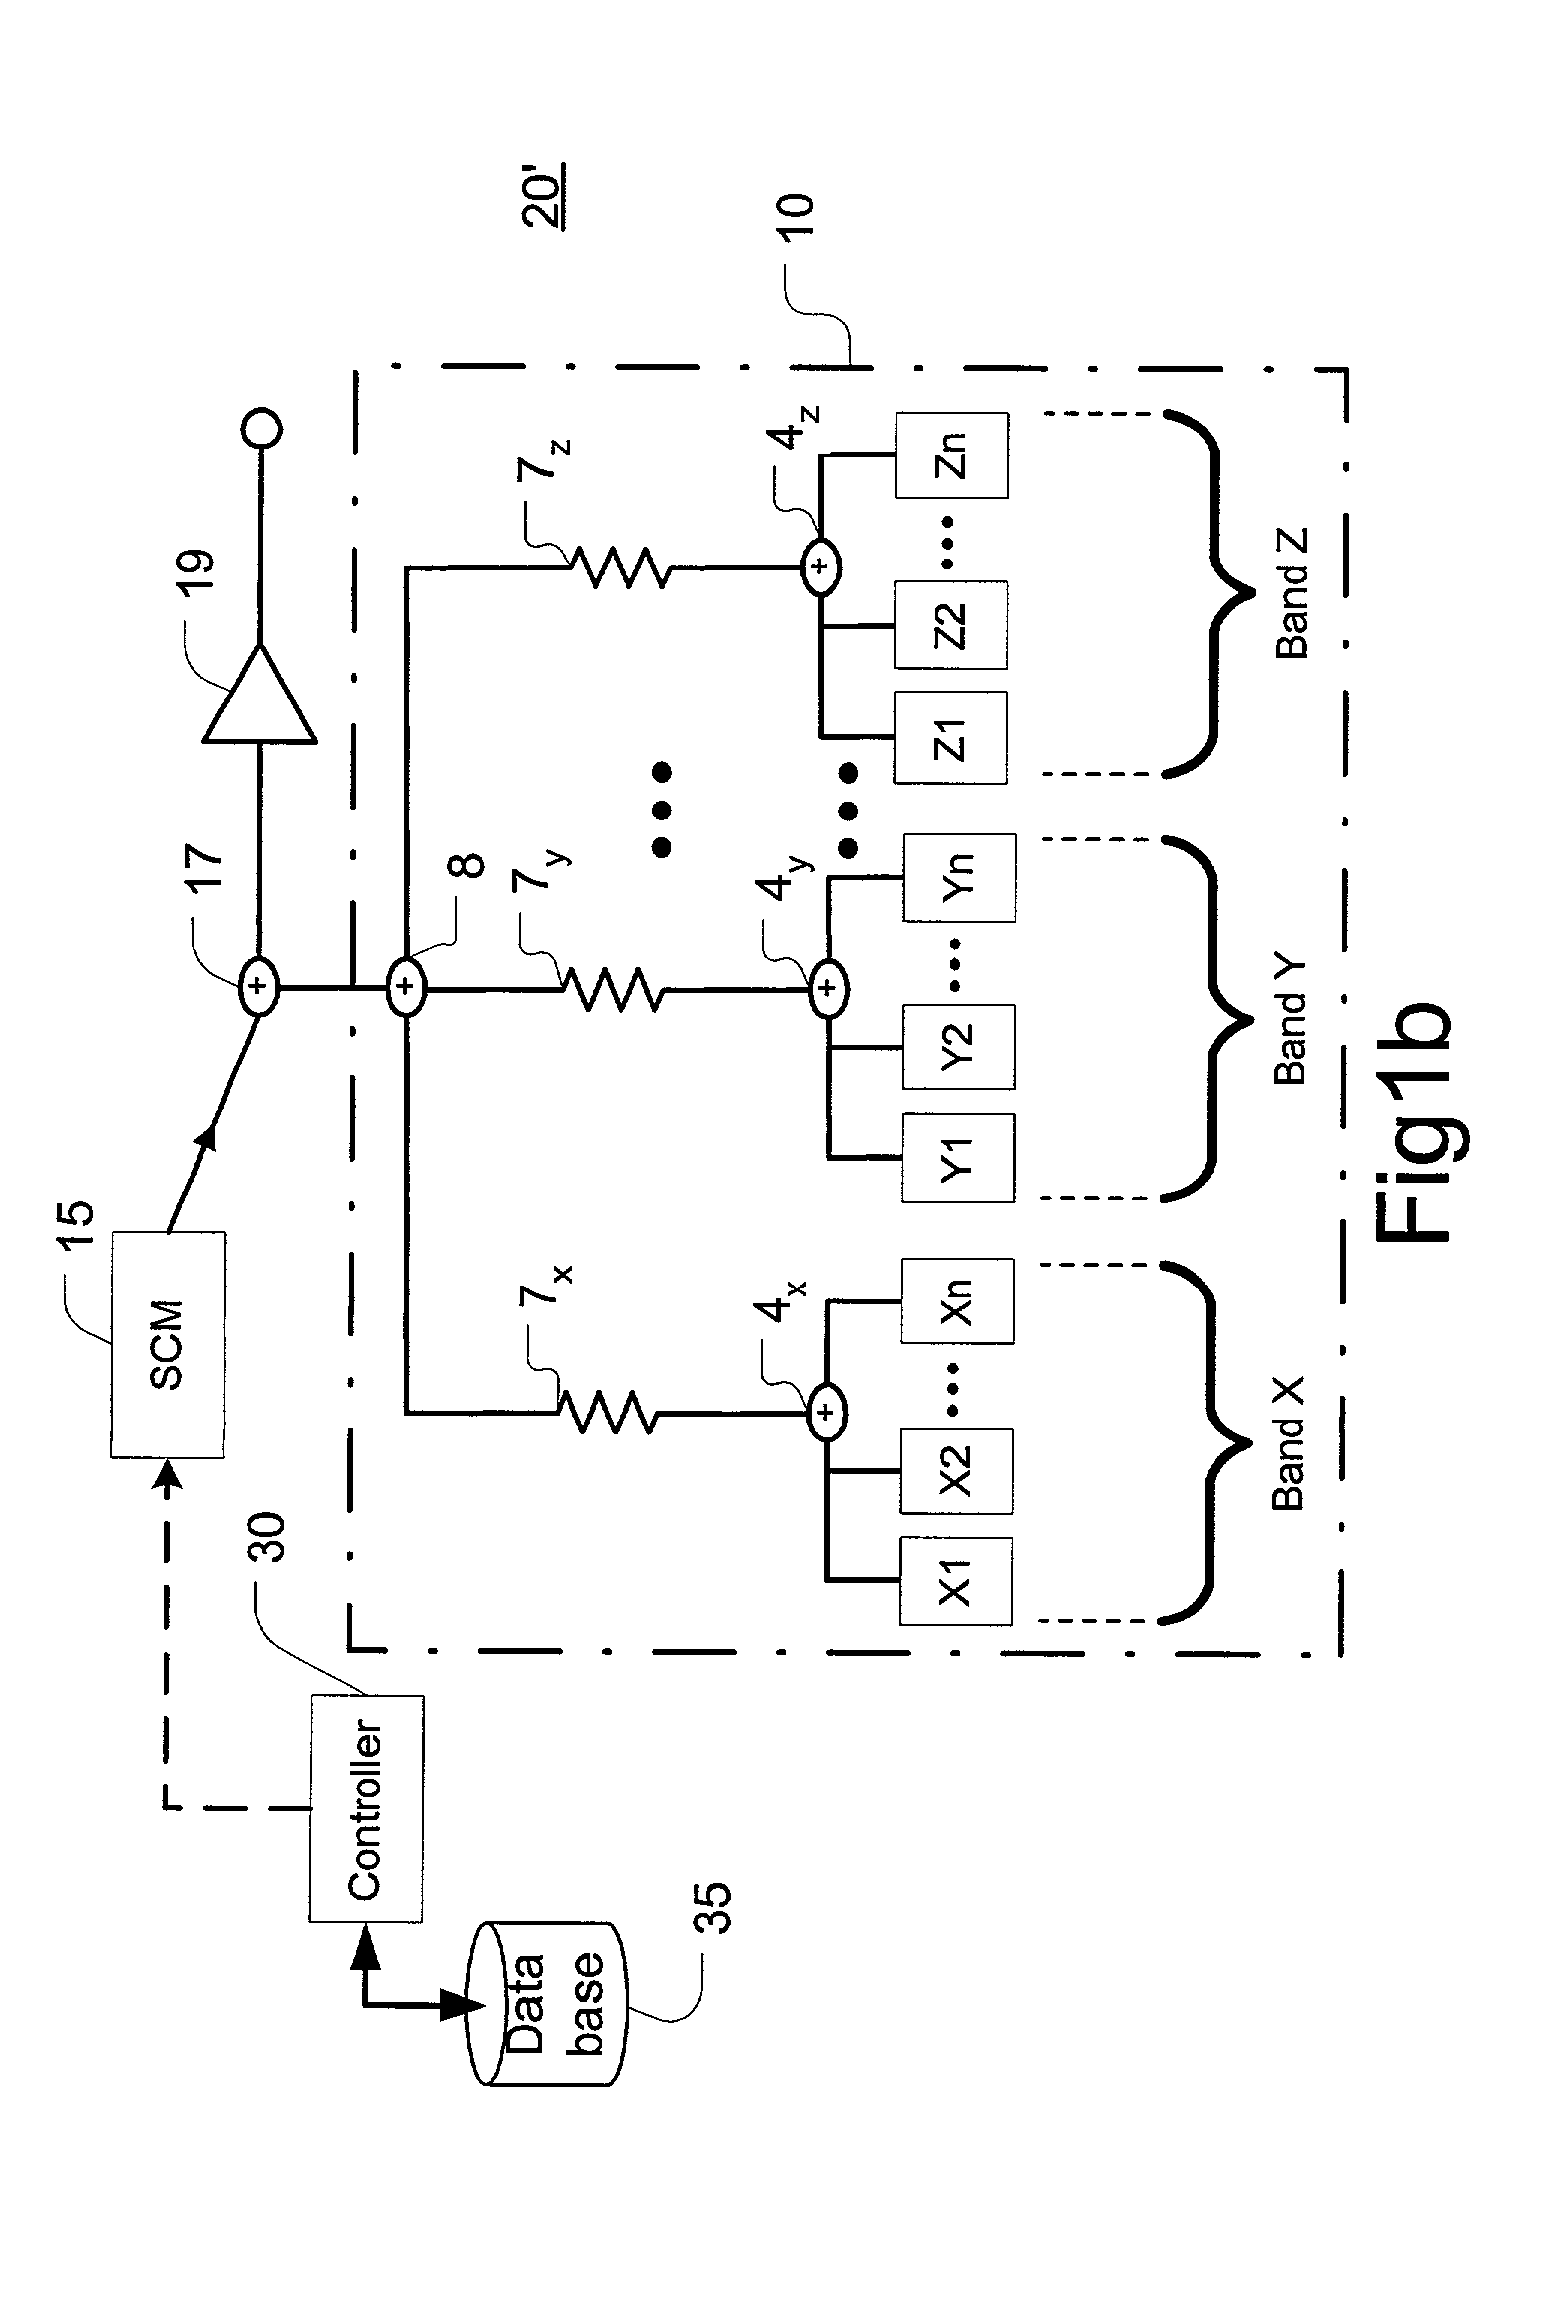 Method and system for coordinating and utilizing channel power information in an optical communications network